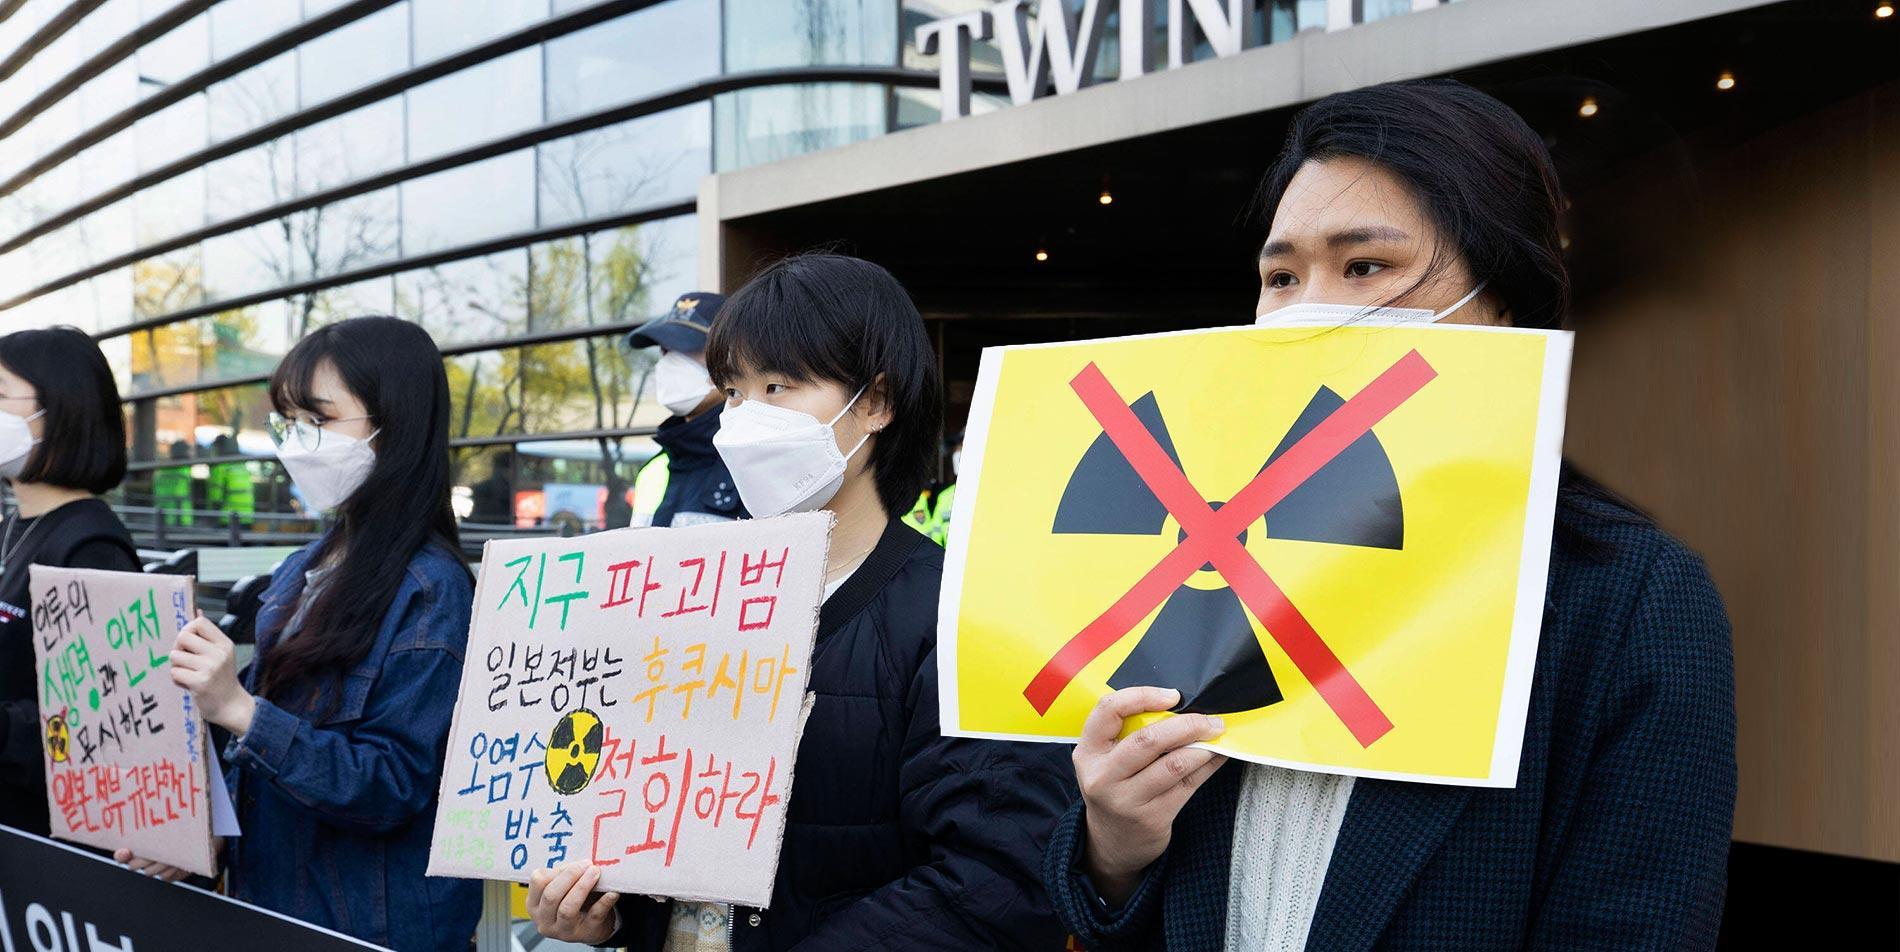 Japan v. Its Neighbors: Japan to Release 1.4 Million Tons of Radioactive Fukushima Wastewater into the Pacific